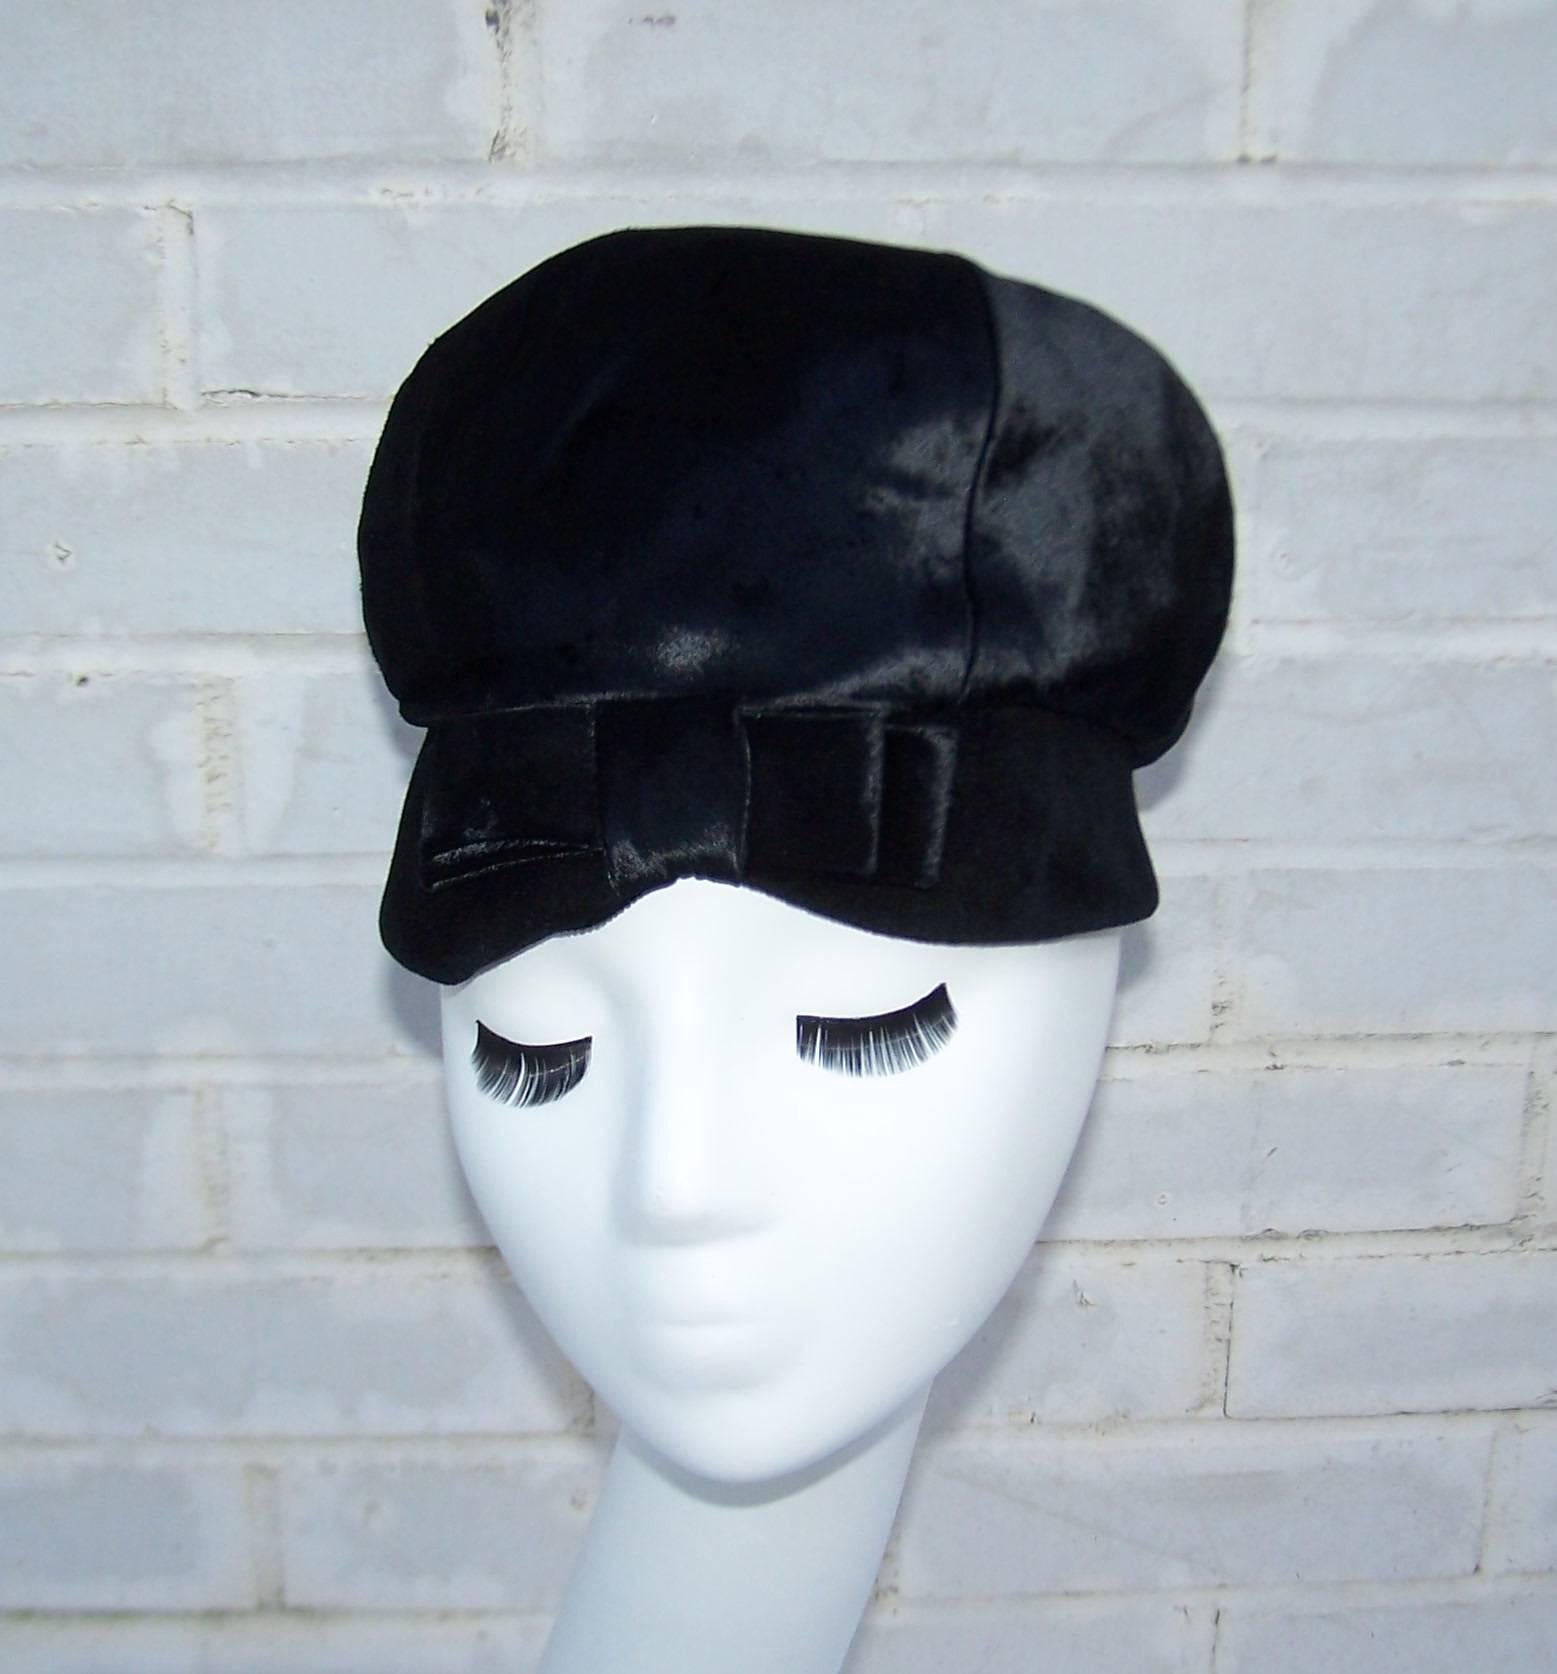 This adorable hat designed by John Harberger for his millinery line, Mr. John Jr., has a 1960's period perfect mod aesthetic.  The body of the hat is a flat velvet that has the feel and appearance of pony hide.  The face framing brim is a soft